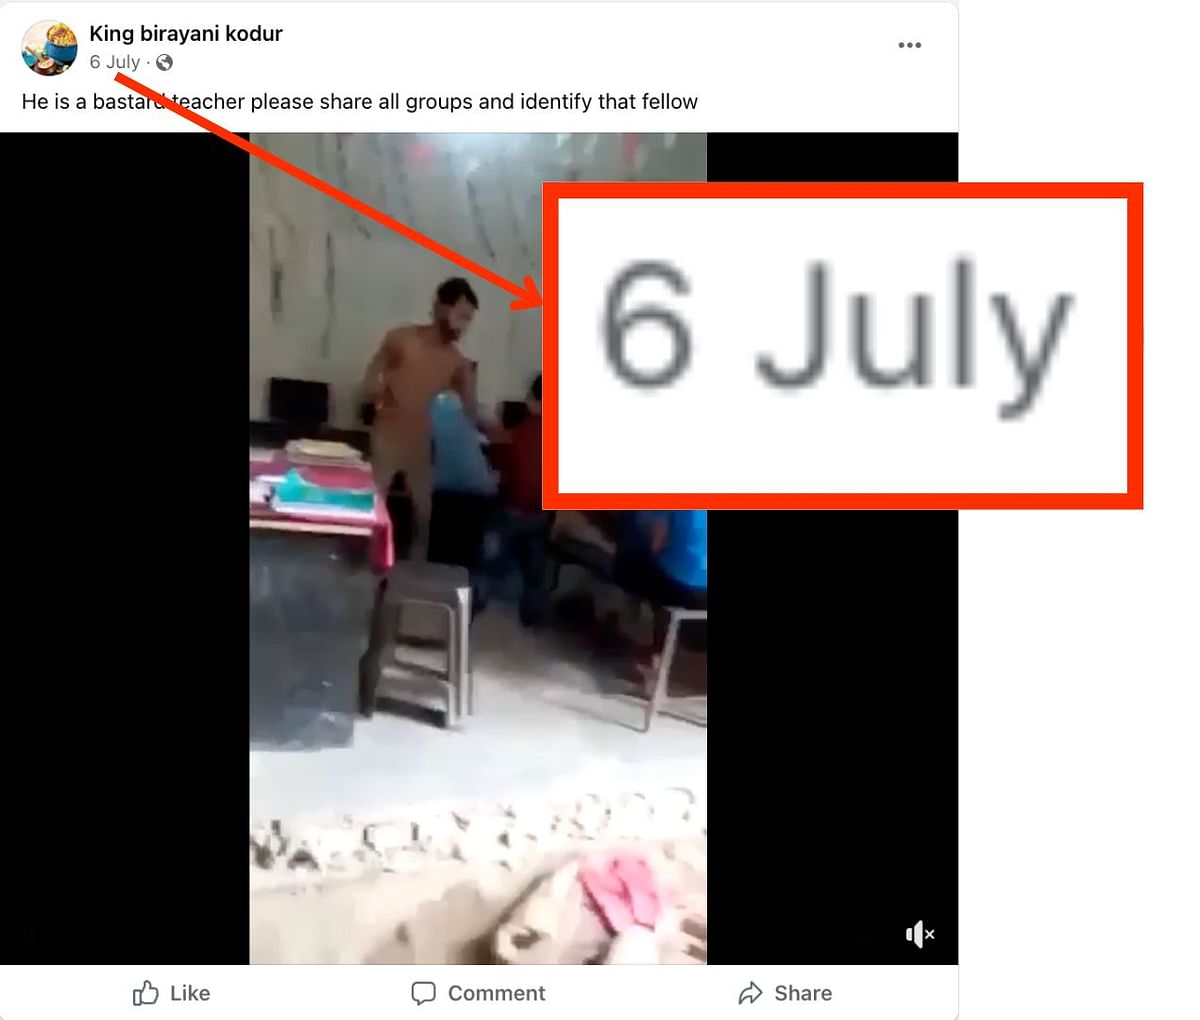 The video shows a tuition teacher, now arrested, allegedly assaulting a boy in Bihar's Patna on 2 July.